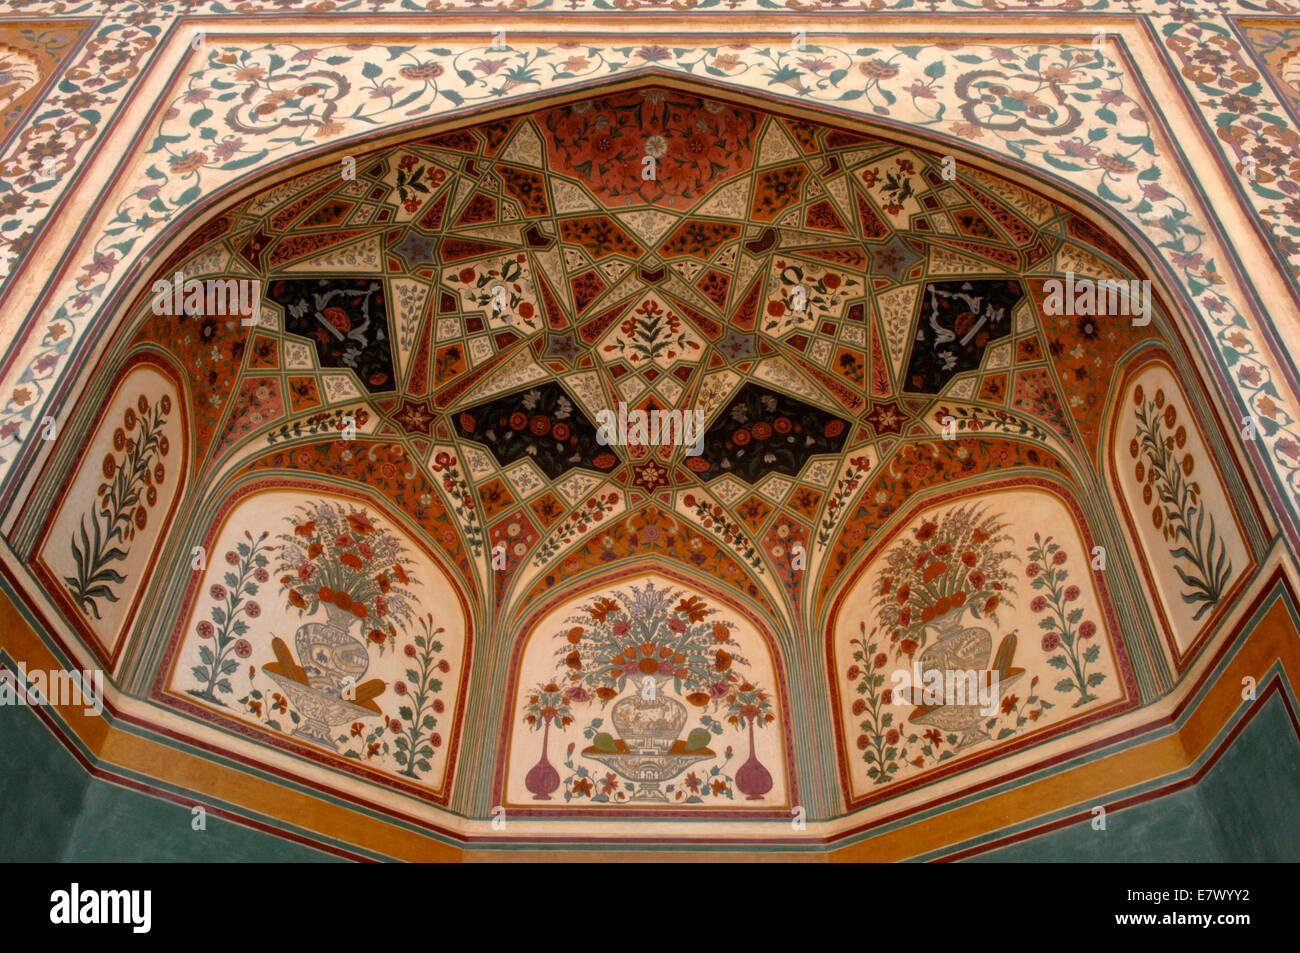 Intricate decoration in the Palace of Amber in Rajasthan, India Stock Photo